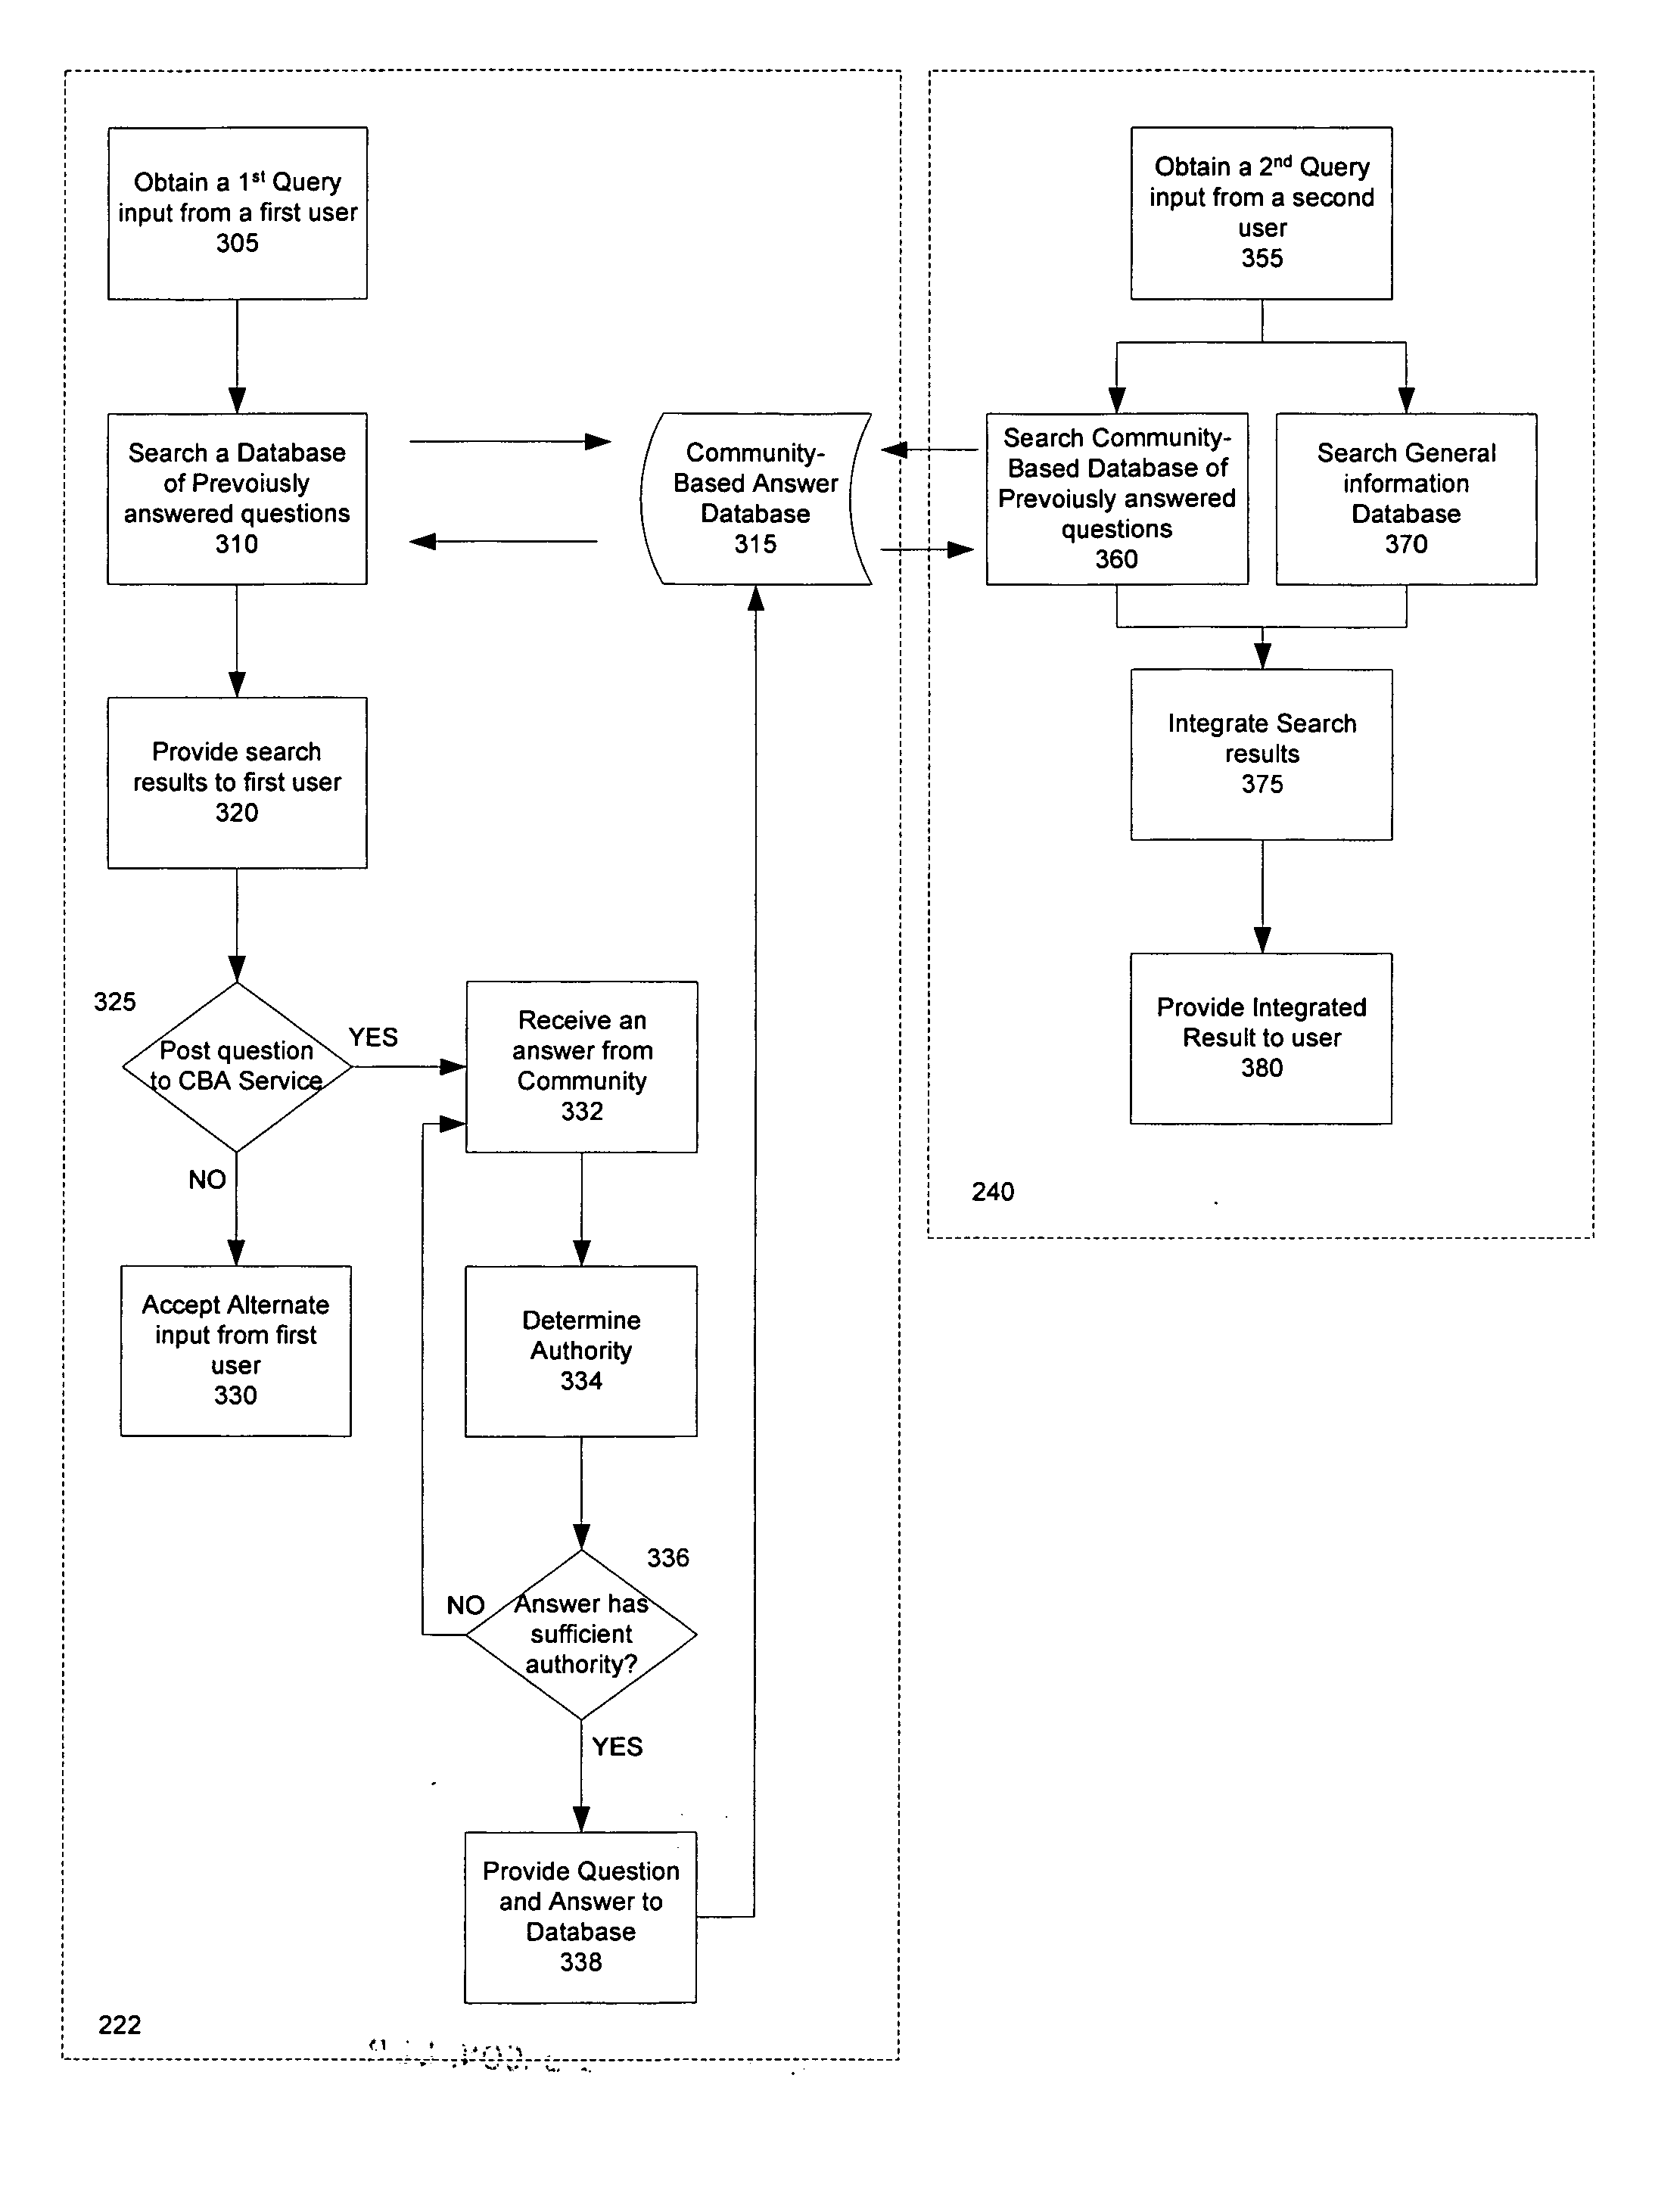 Computer-implemented system and method for providing authoritative answers to a general information search